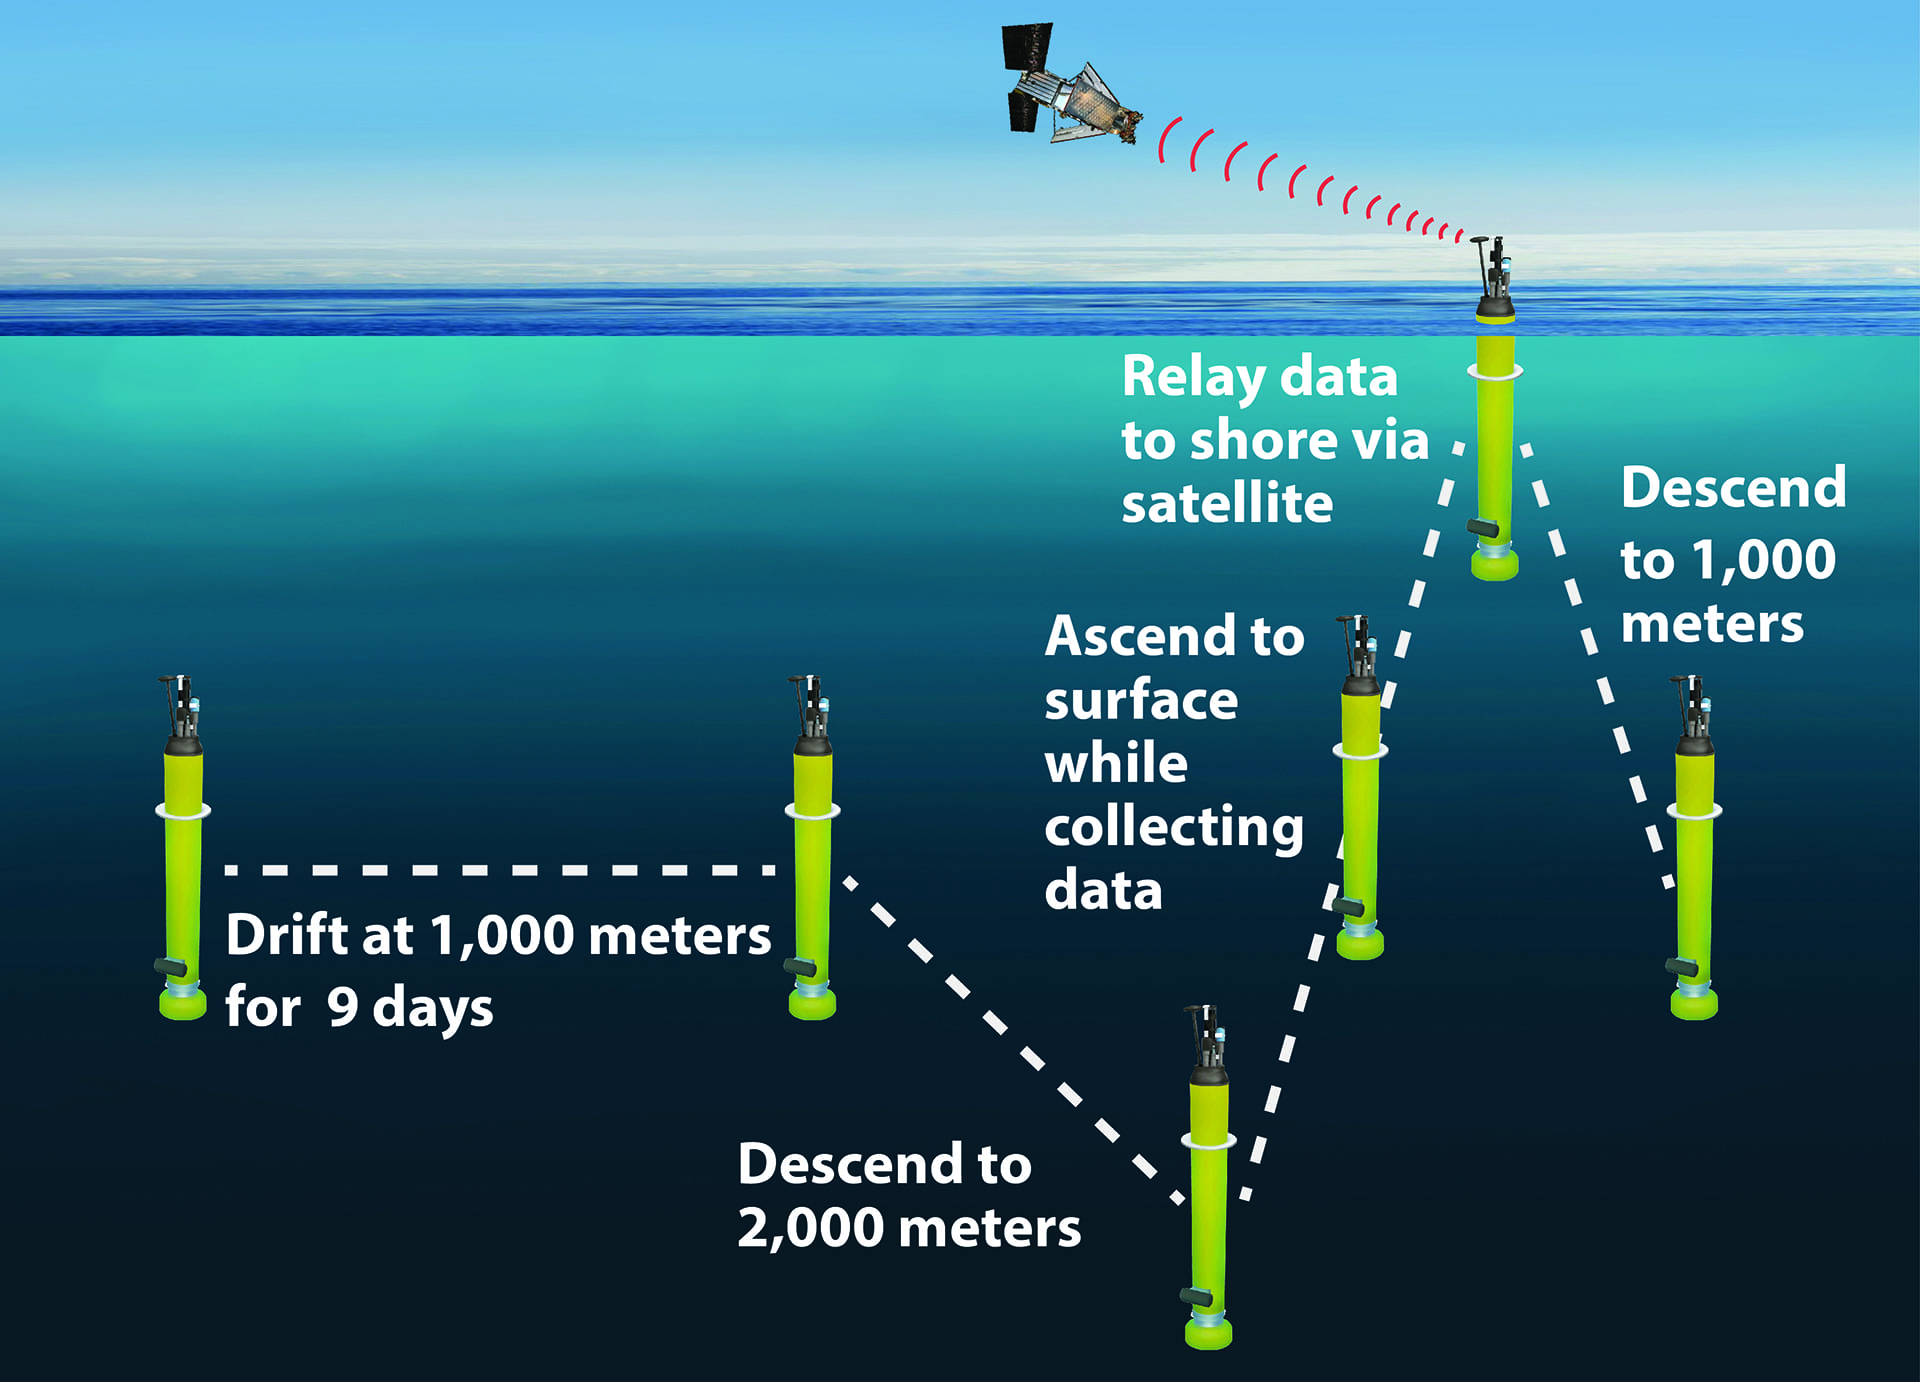 Illustration showing the operation of a typical Argo profiling float. (Image by Kim Fulton-Bennett, © 2020 MBARI)